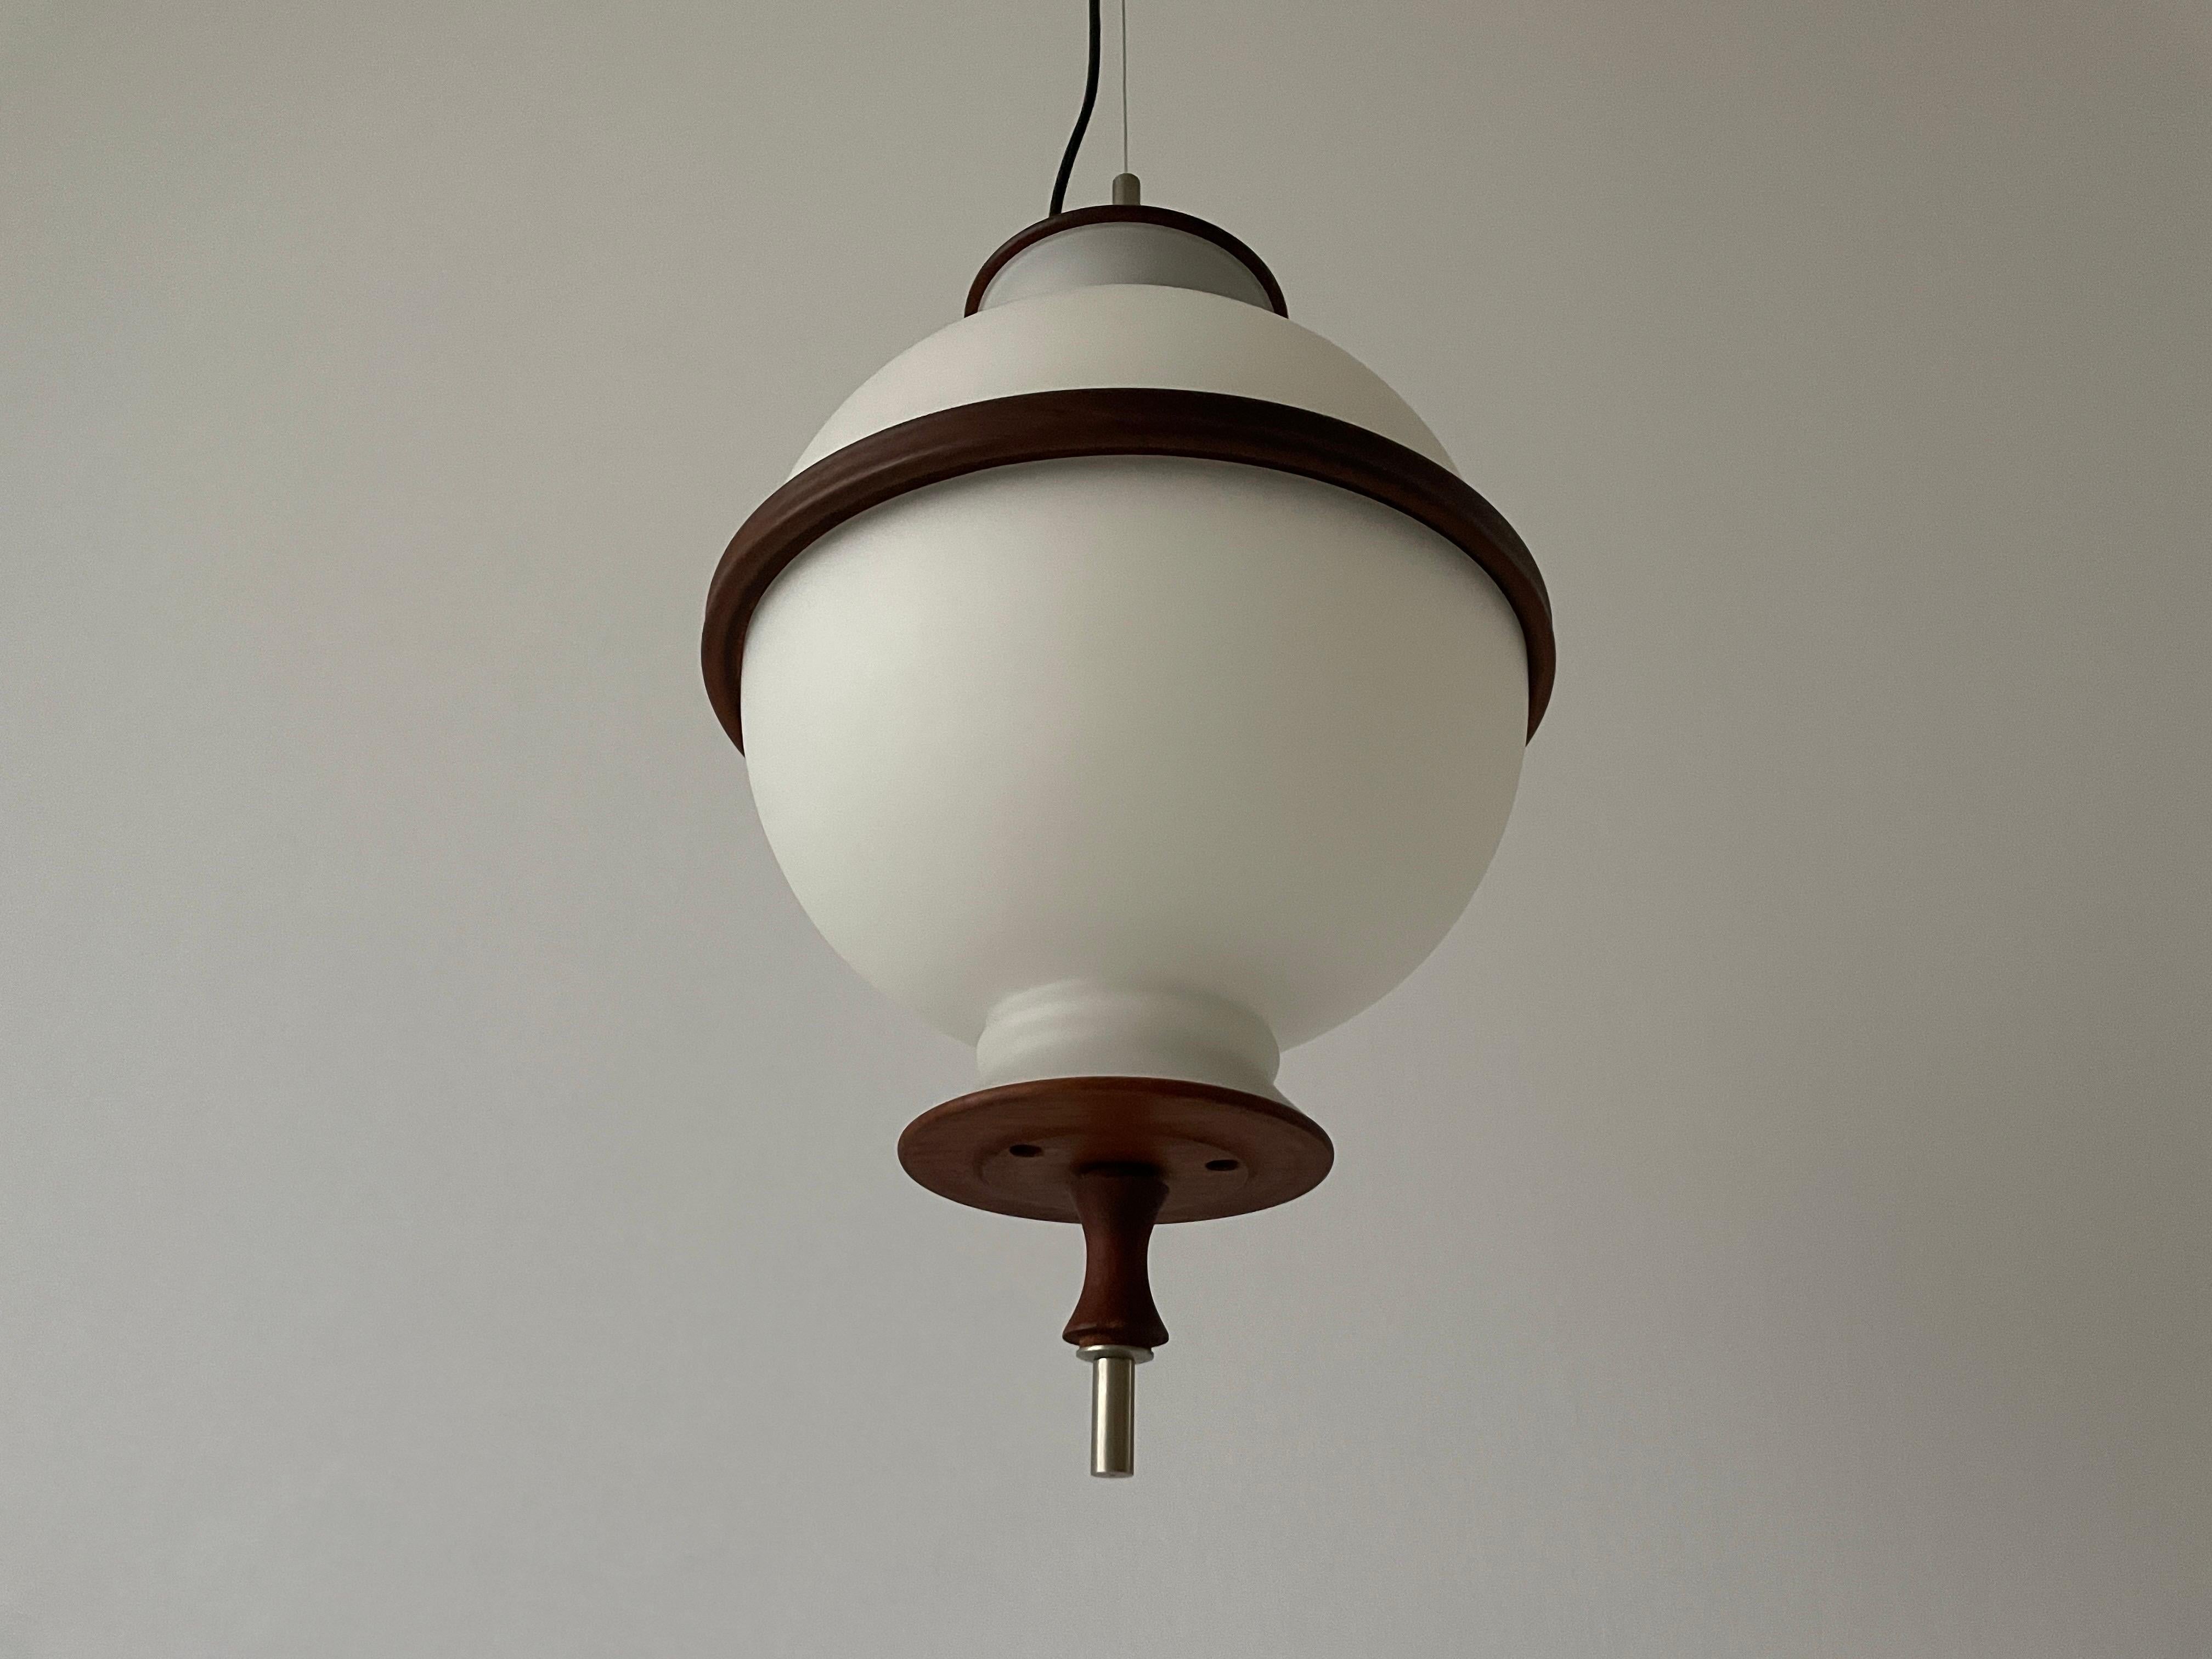 Opal Glass and Teak Ceiling Lamp by Reggiani Illuminazione, 1960s, Ital

This lamp works with E27 light bulbs. 
Wired and suitable to use with 220V and 110V for all countries.

Measurements:
Height: 140 cm (can be shortened)
Shade diameter and